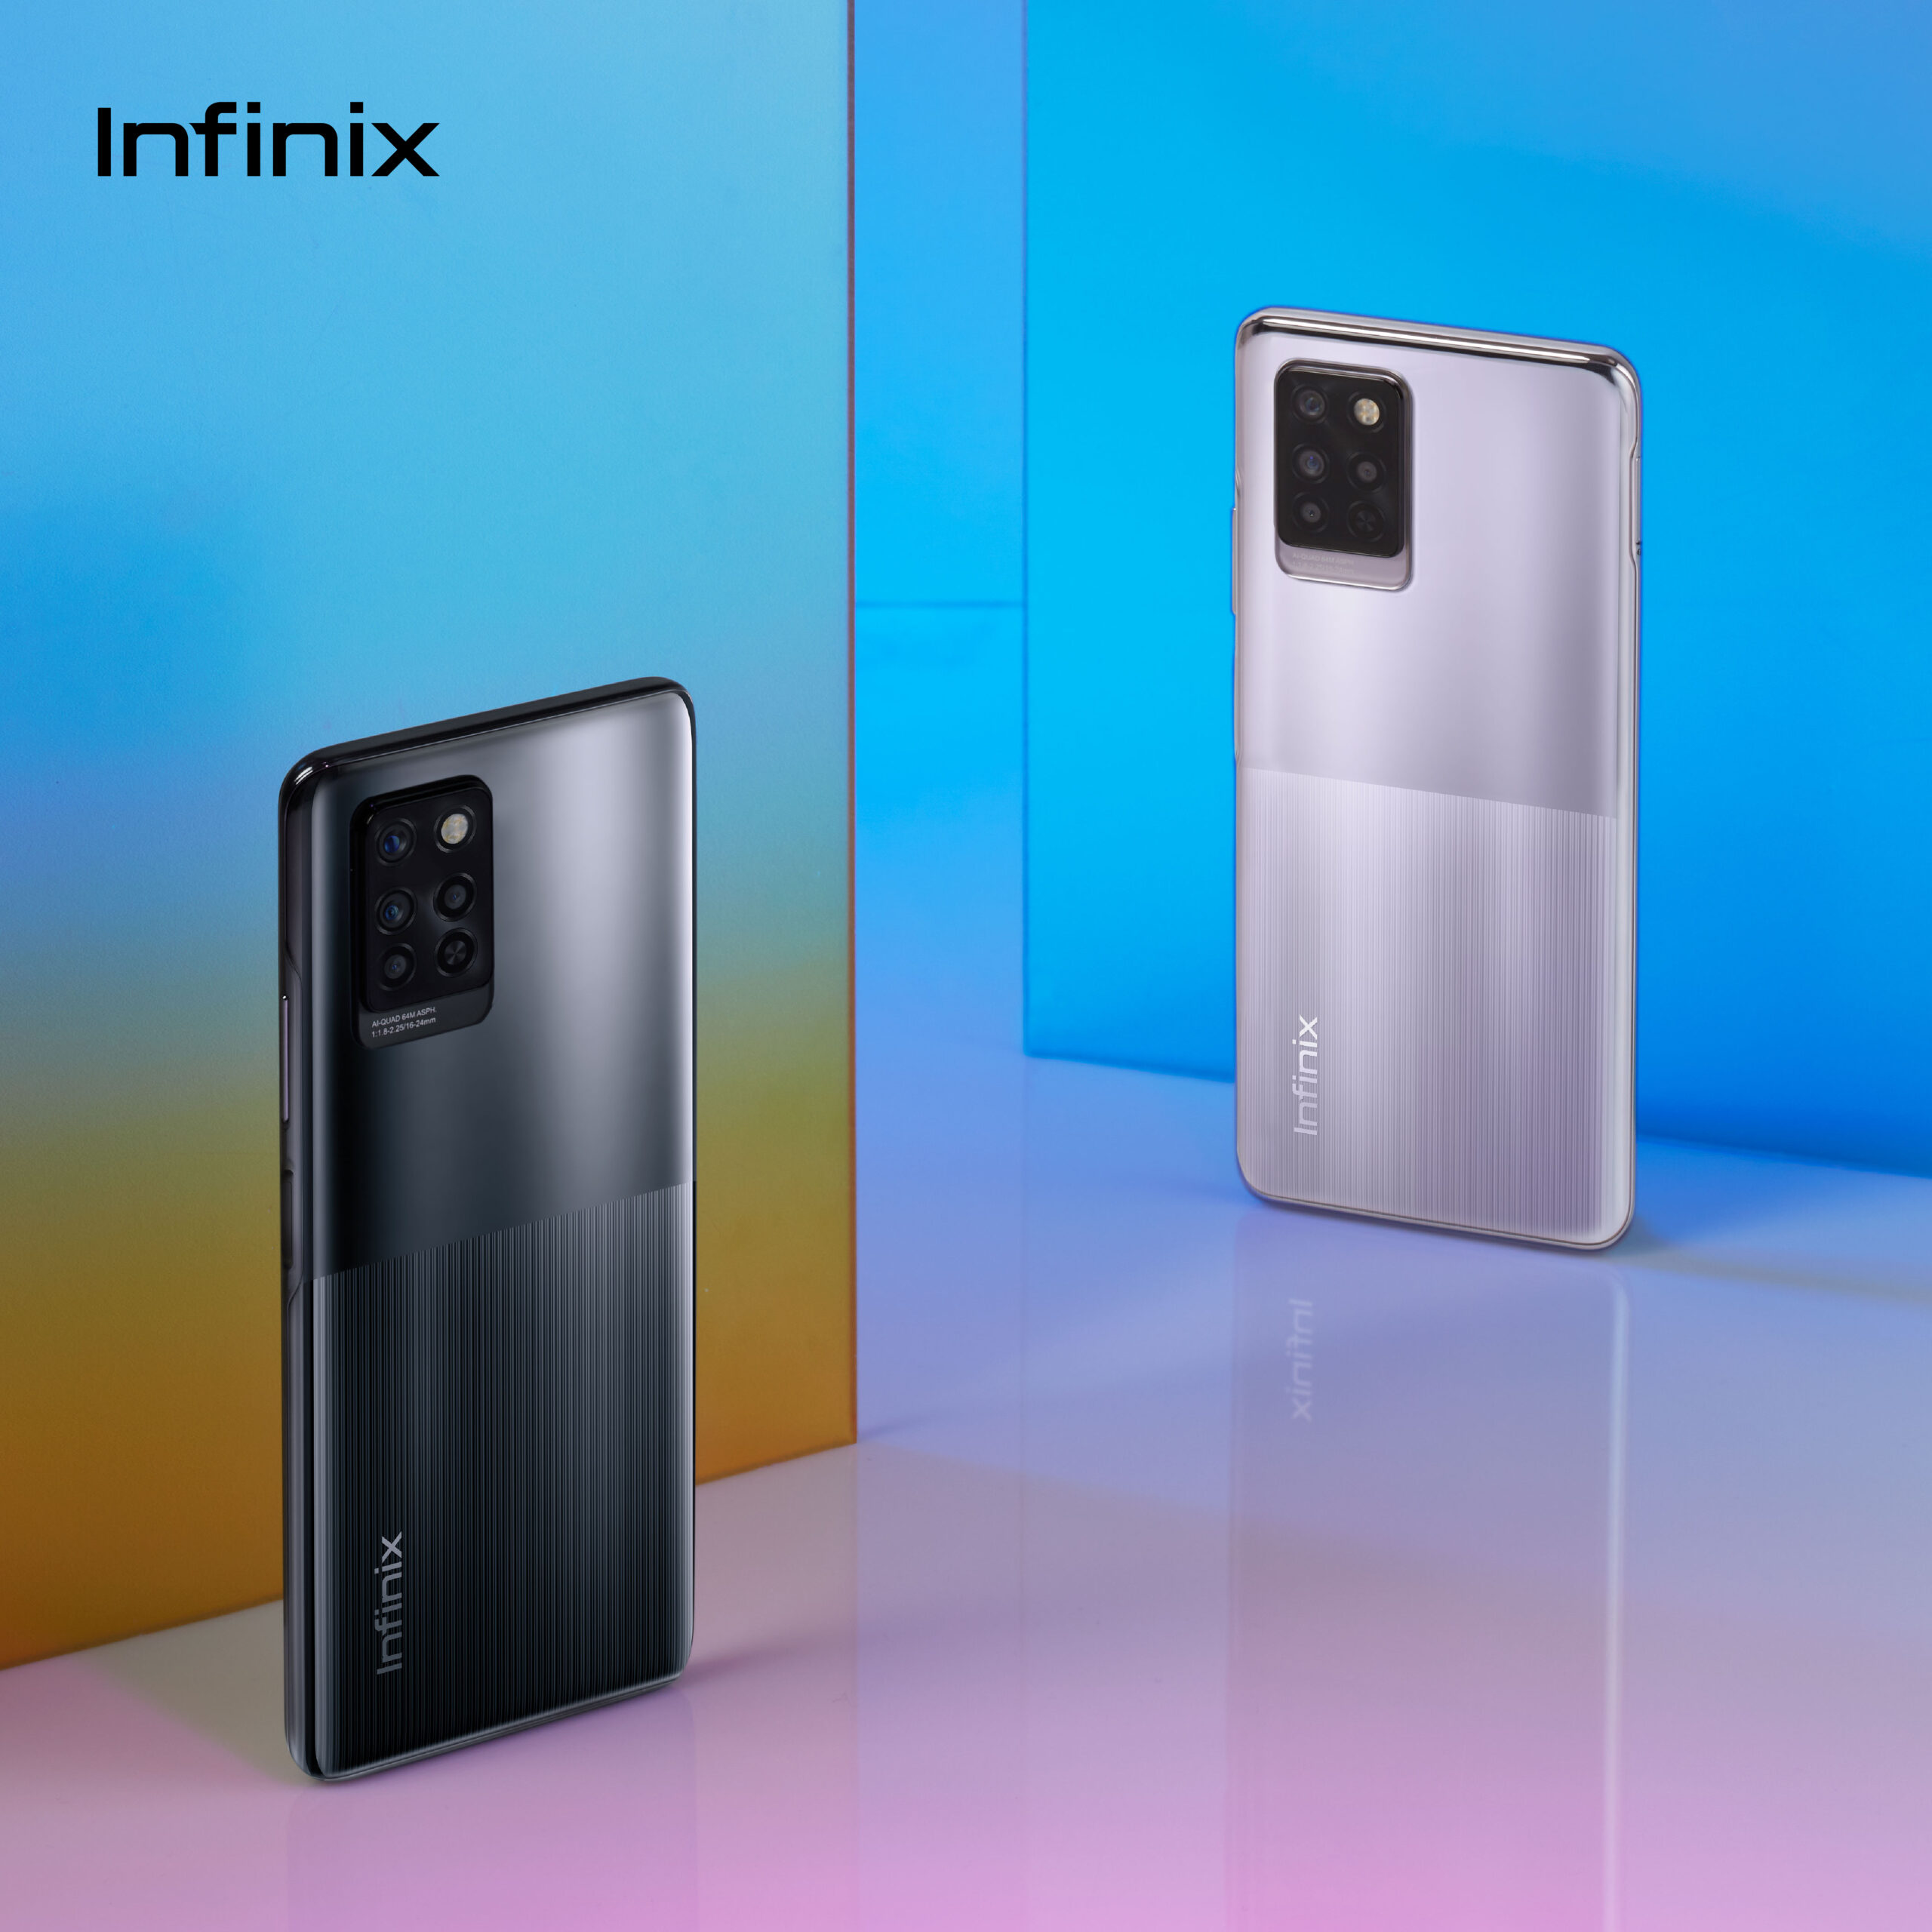 Infinix note 10 pro. I tried out a gaming phone that cost less than rm800, here is my review.